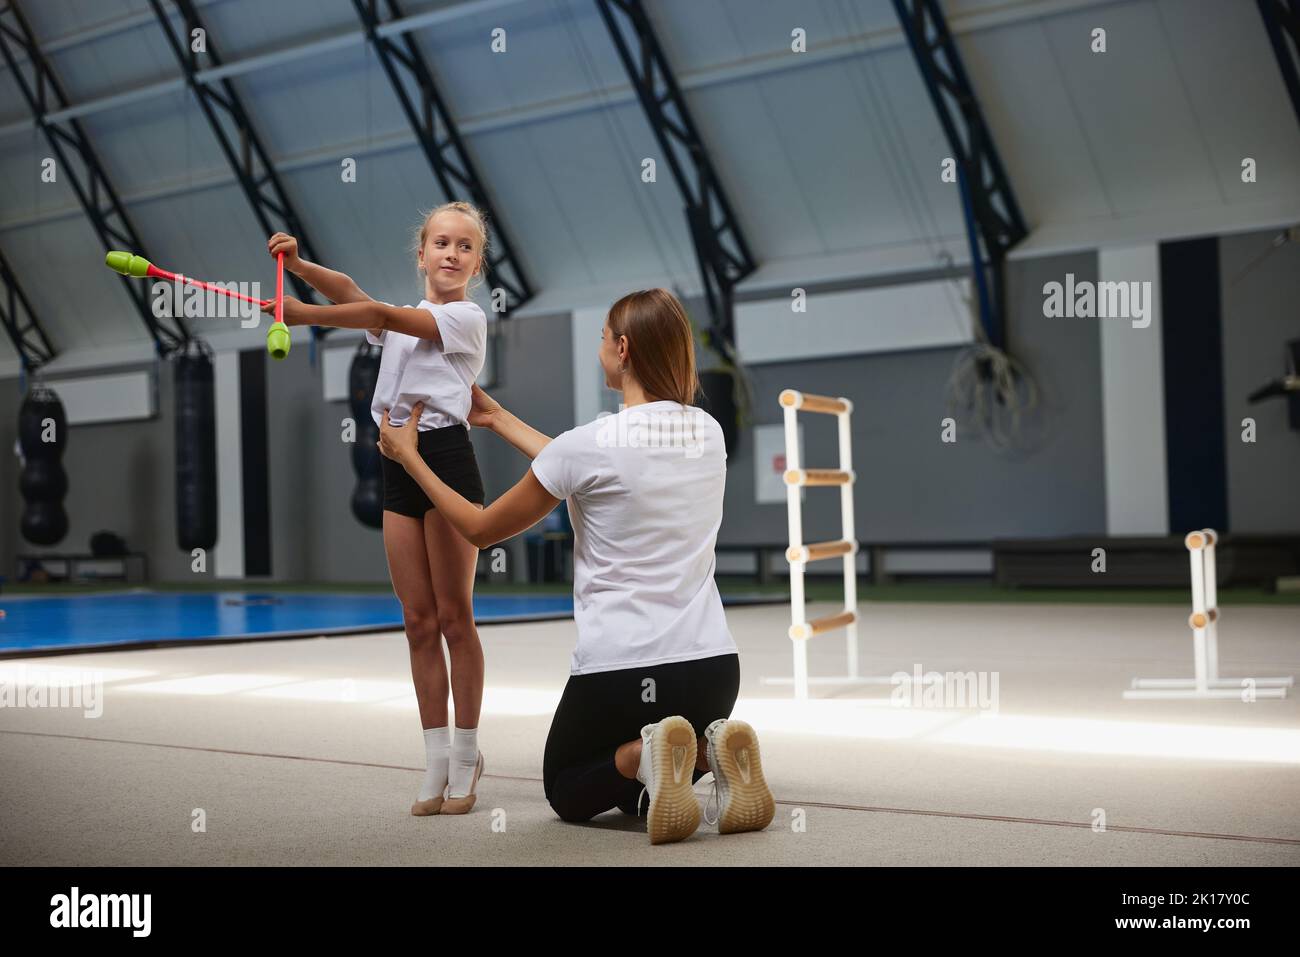 Little girls, beginner gymnastics athletes doing exercises with gymnastics equipment at sports gym, indoors. Concept of studying, achievements, skills Stock Photo